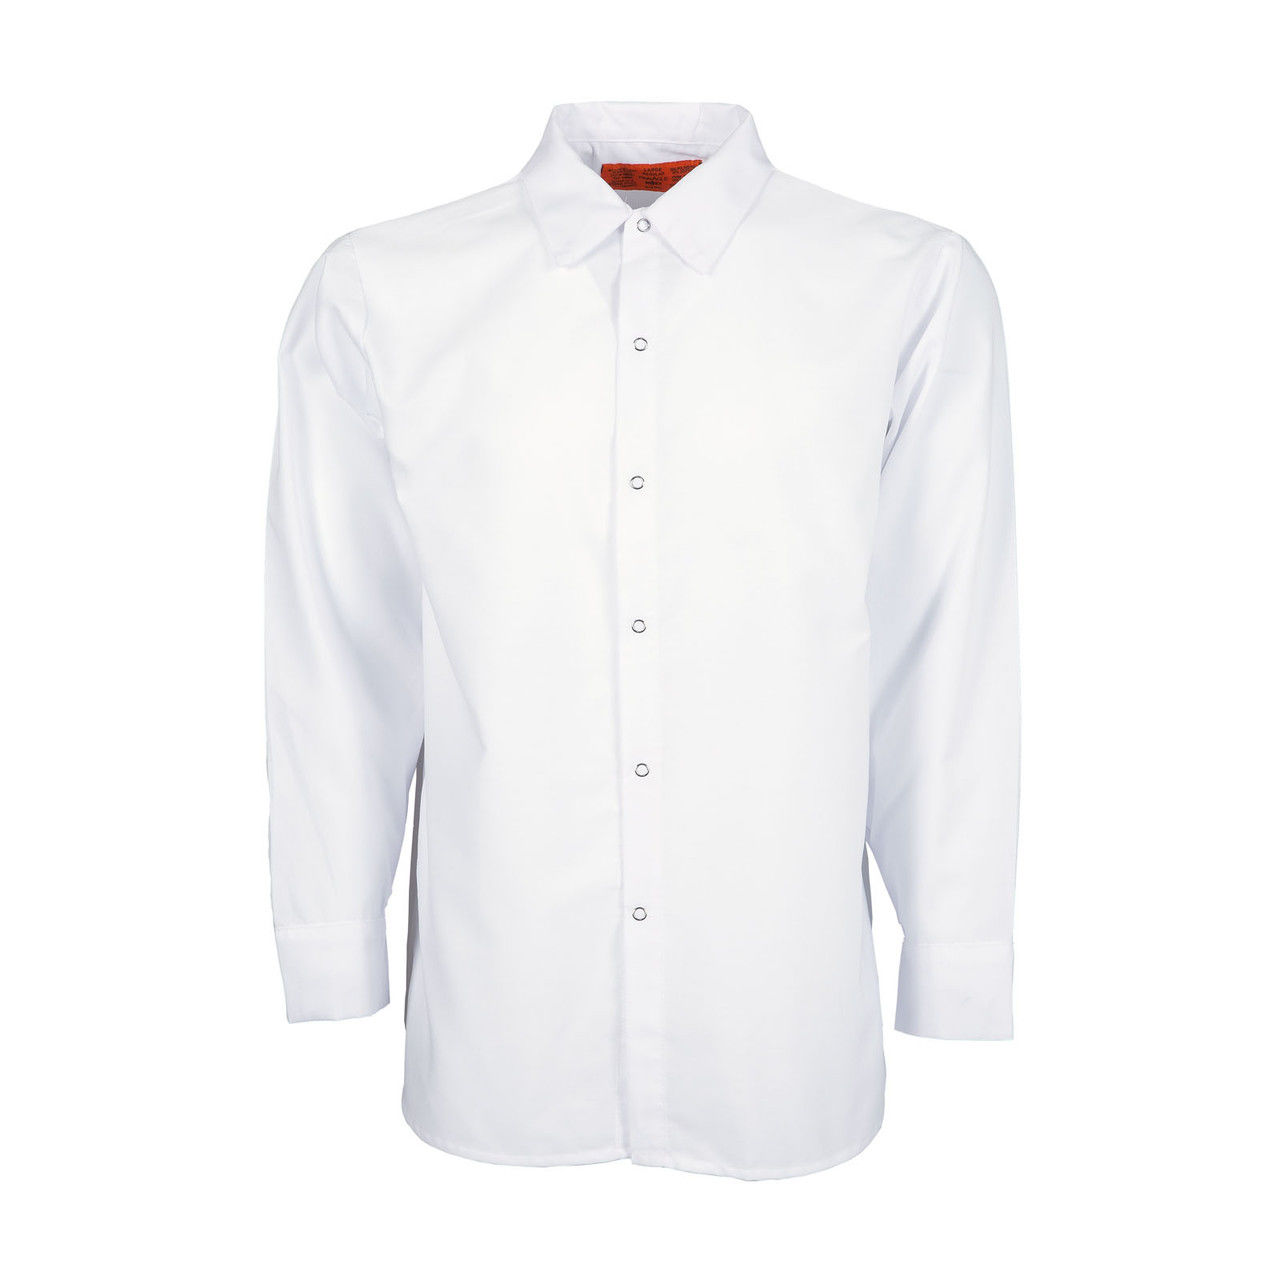 What fabric is used for white work shirts mens?